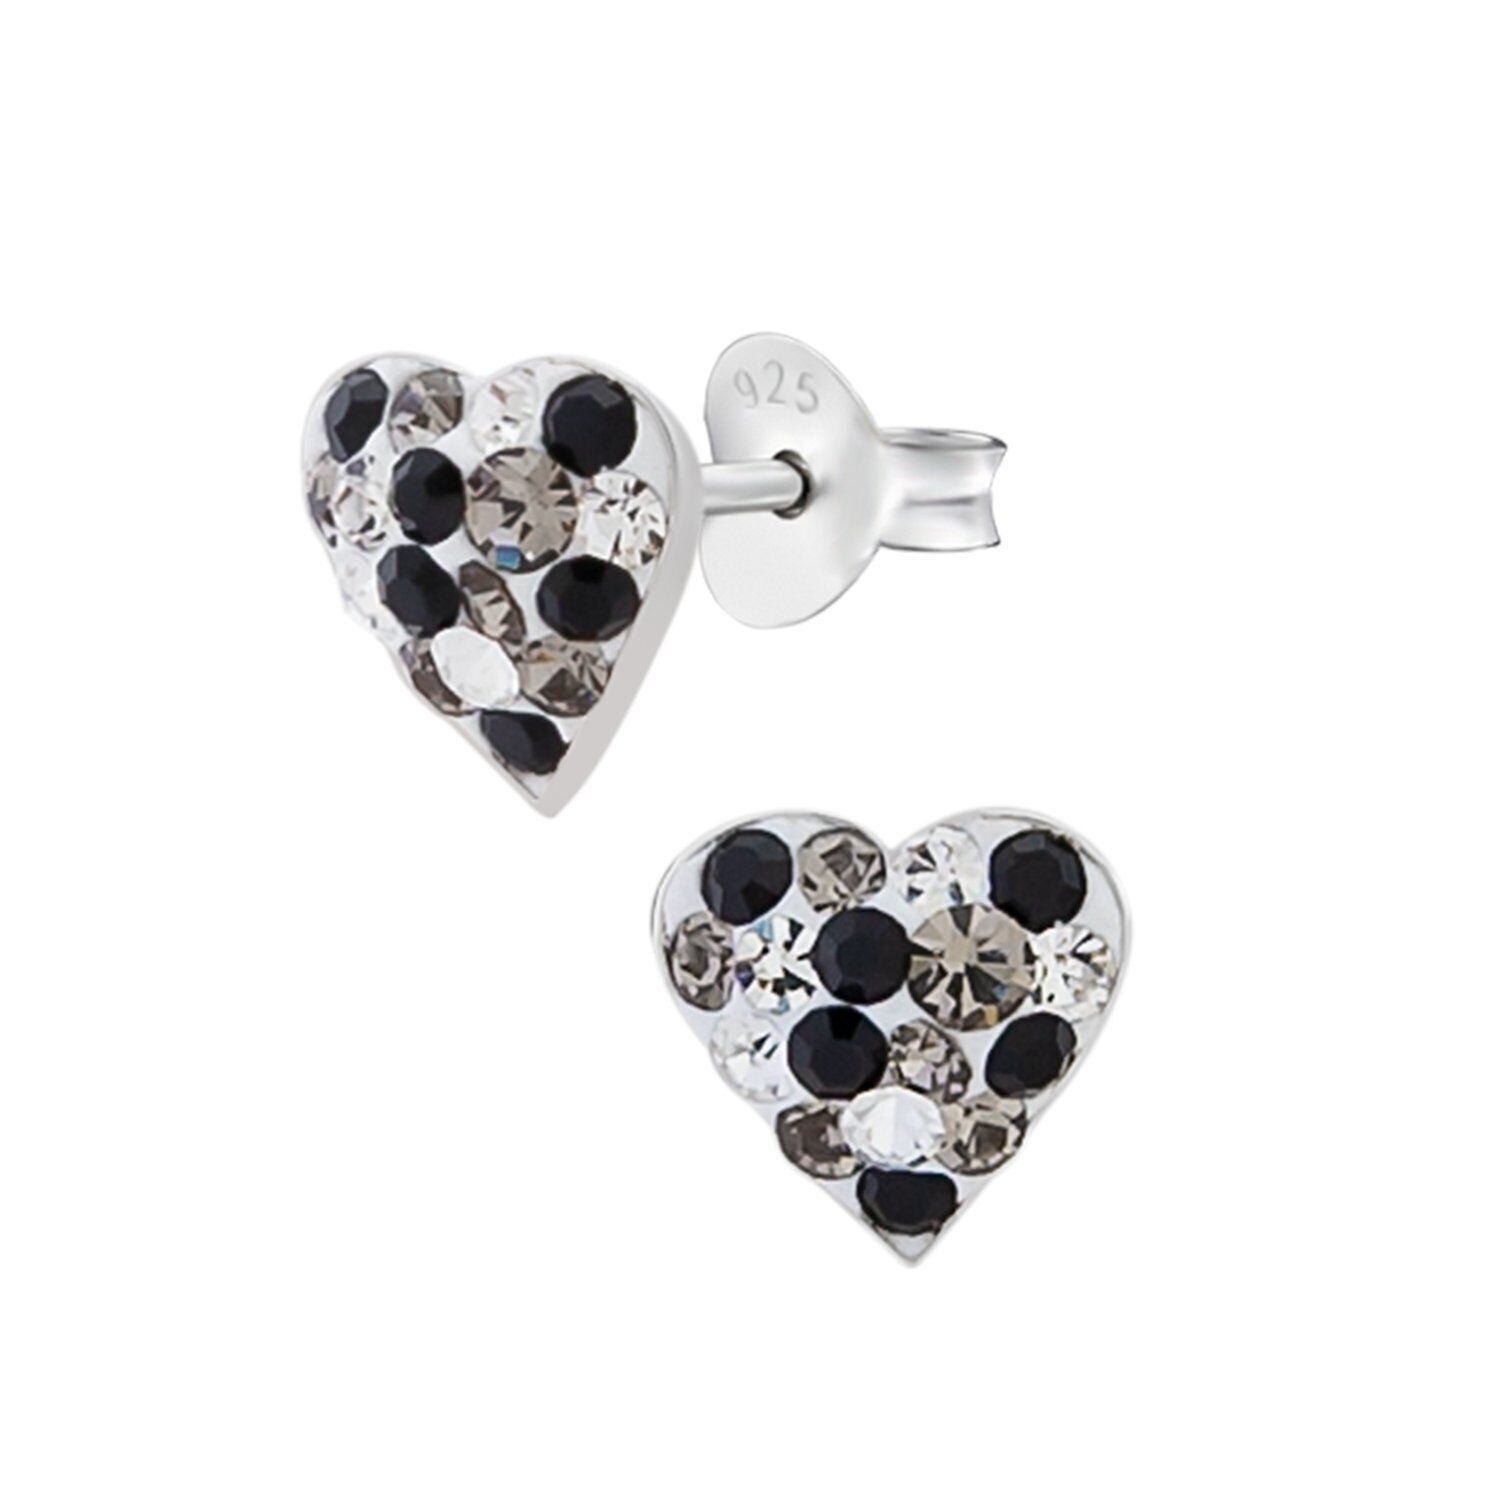 Primary image for Multi Crystals Heart 925 Sterling Silver Stud Earrings